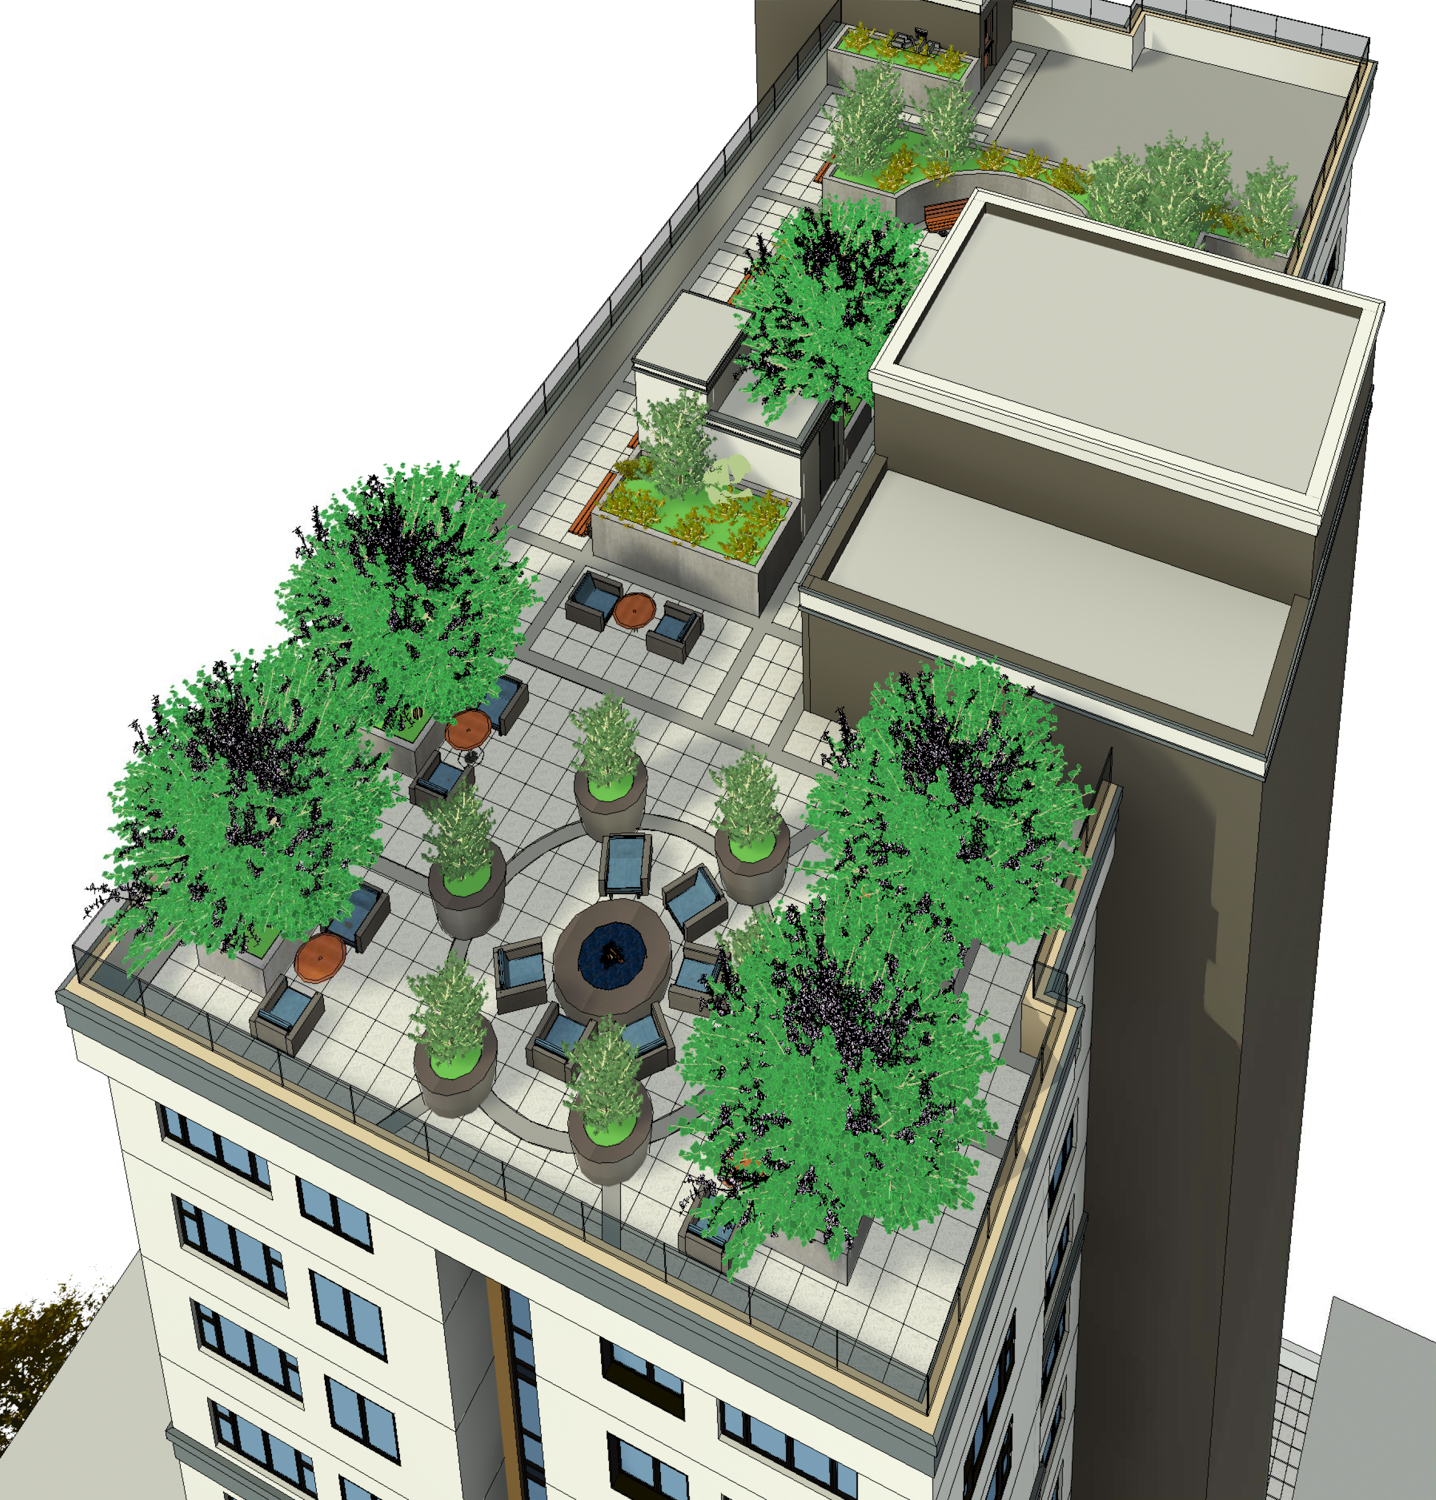 19 North 2nd Street rooftop deck, rendering by Anderson Architects